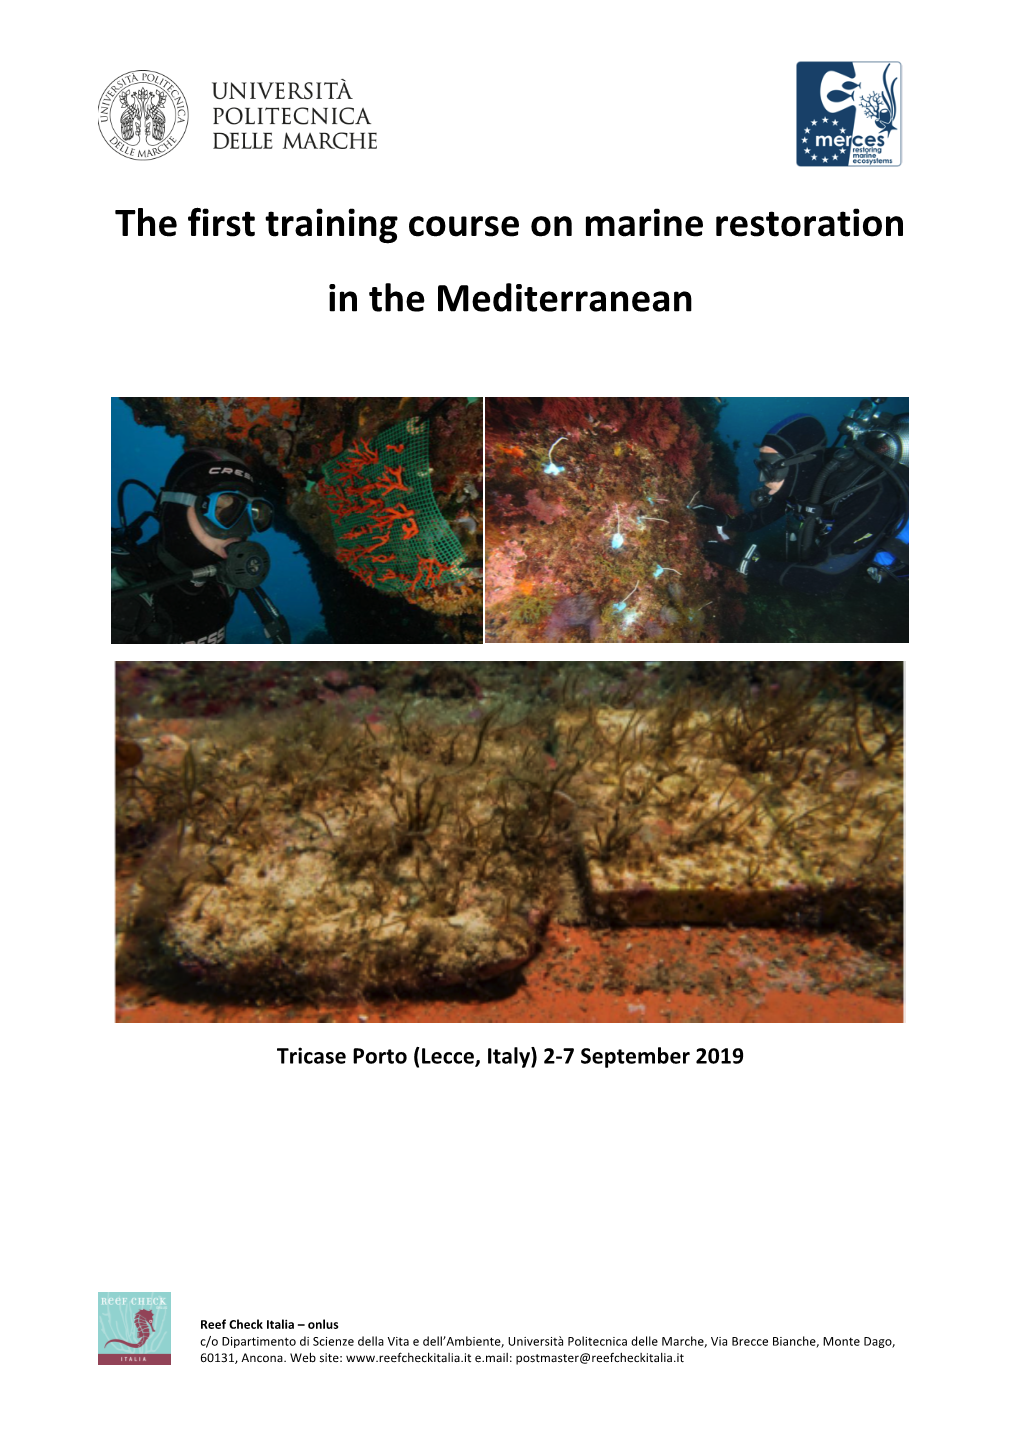 The First Training Course on Marine Restoration in the Mediterranean